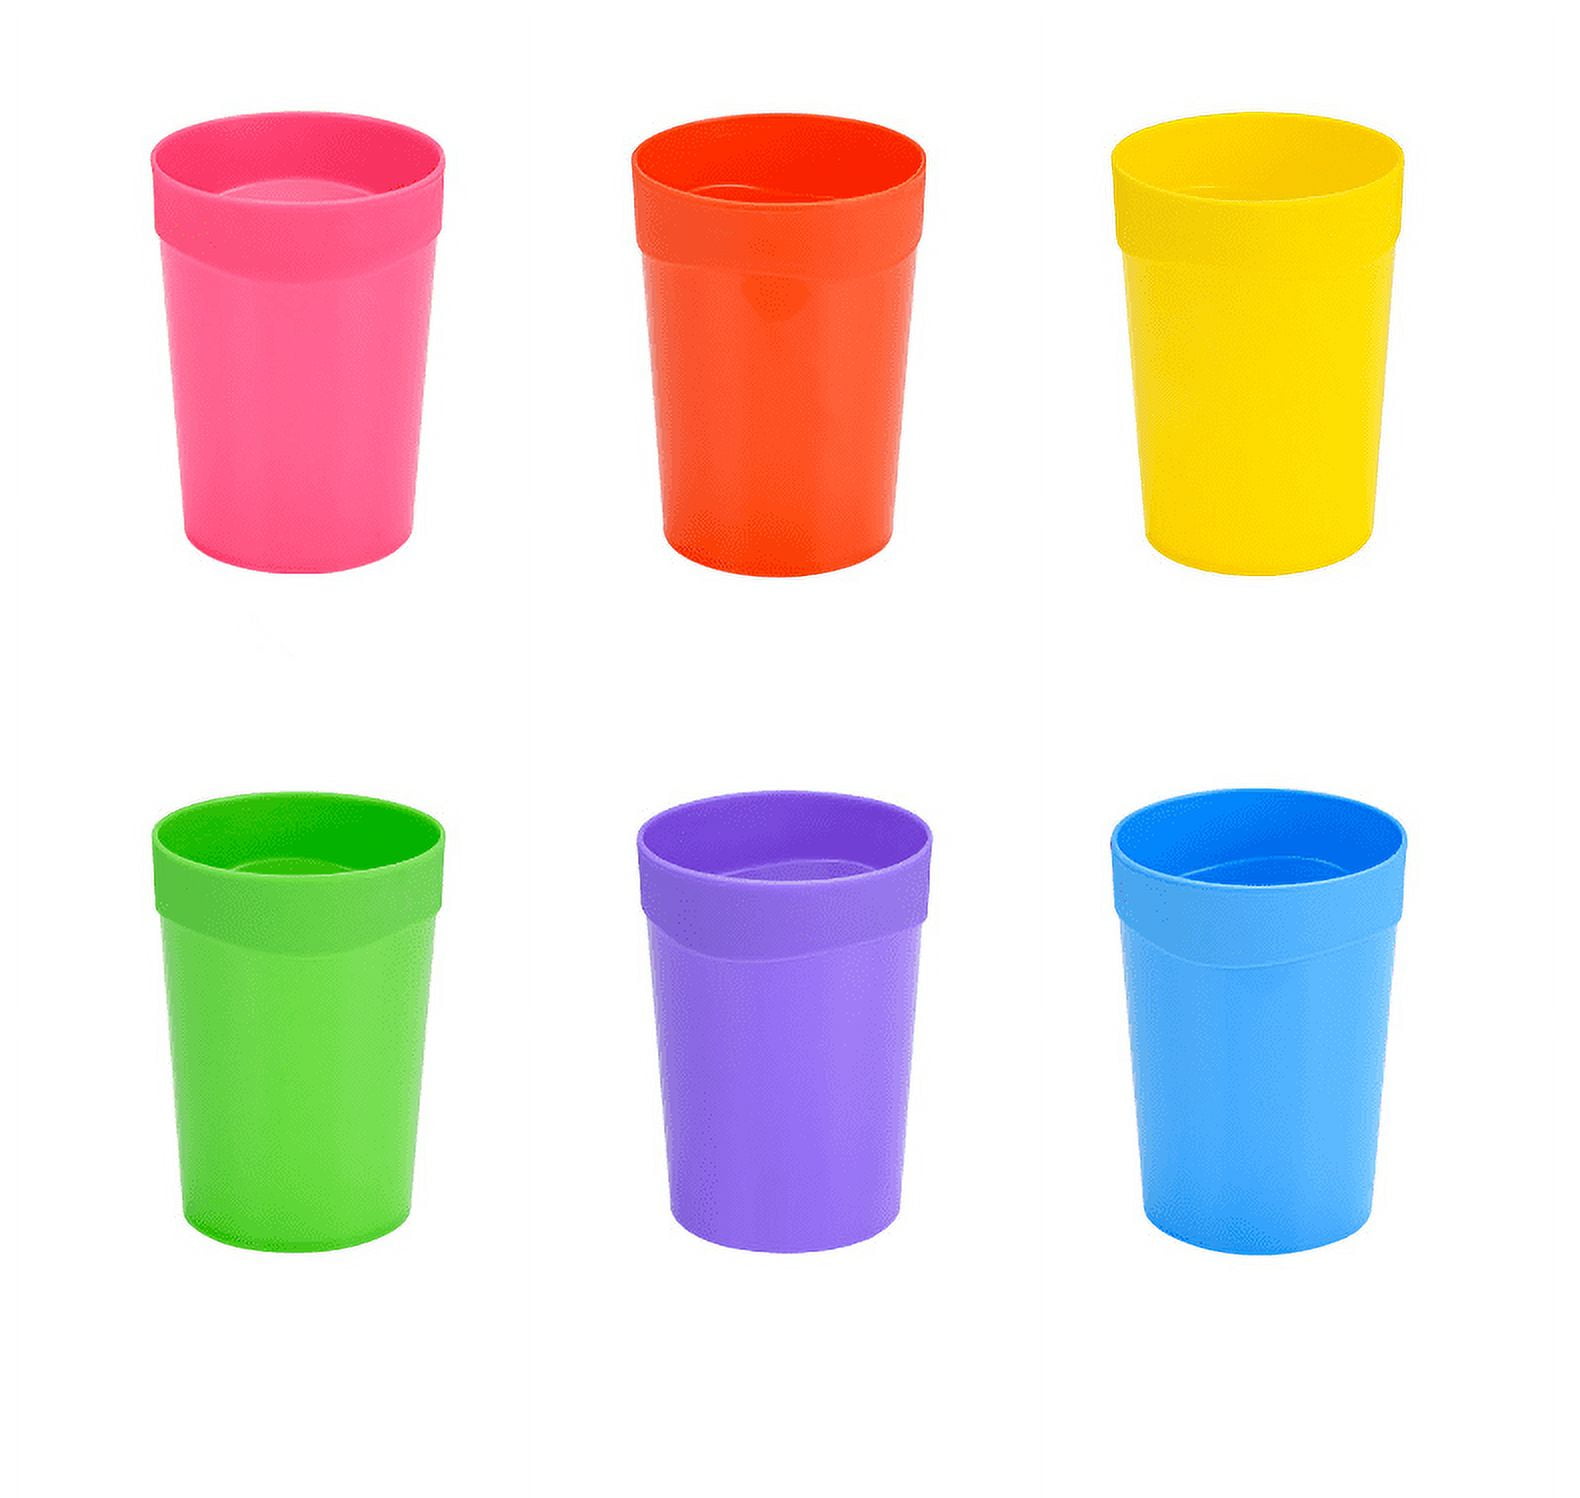 Multicolor Mayatra's Unbreakable Cartoon Design Milk Cups for Kids, Age  Group: Adults, Capacity: 450